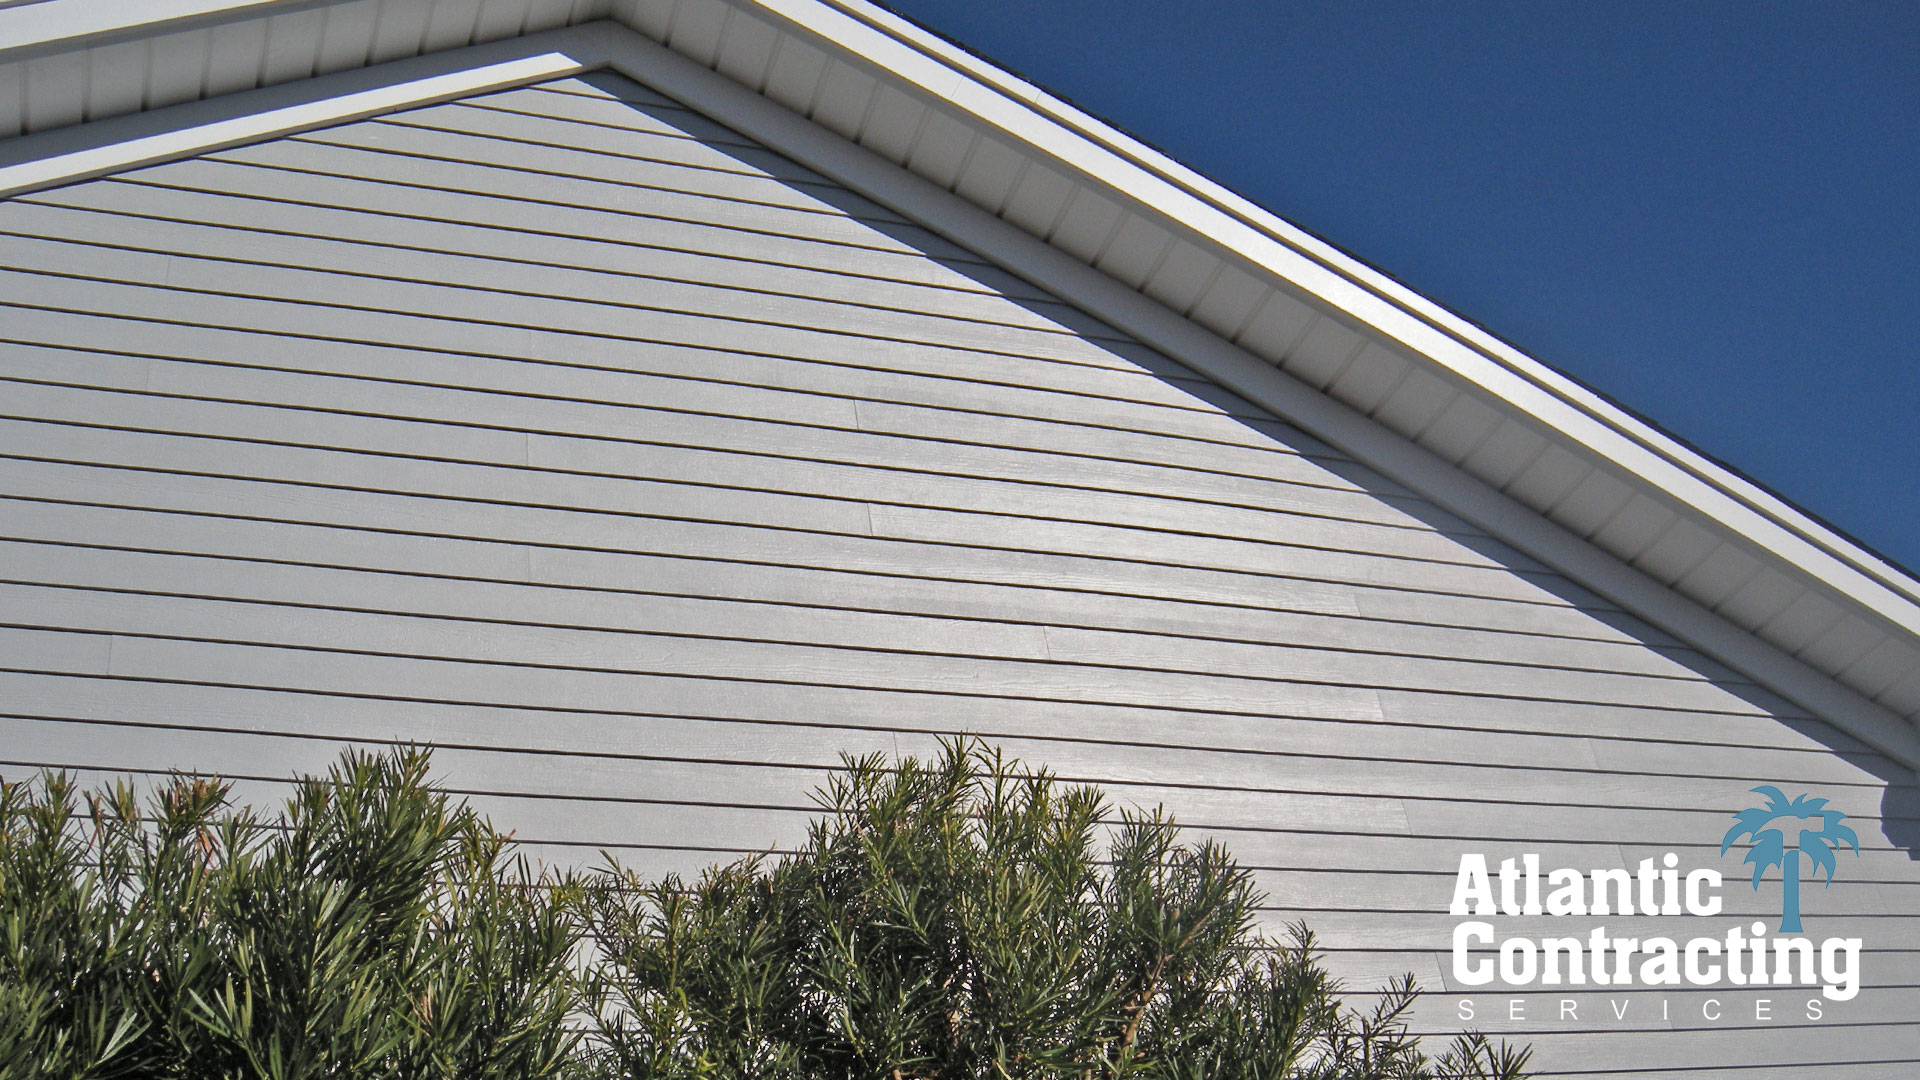 James Hardie Siding Contractor, Myrtle Beach : We Replaced Old Vinyl Siding with HardiPlank Siding